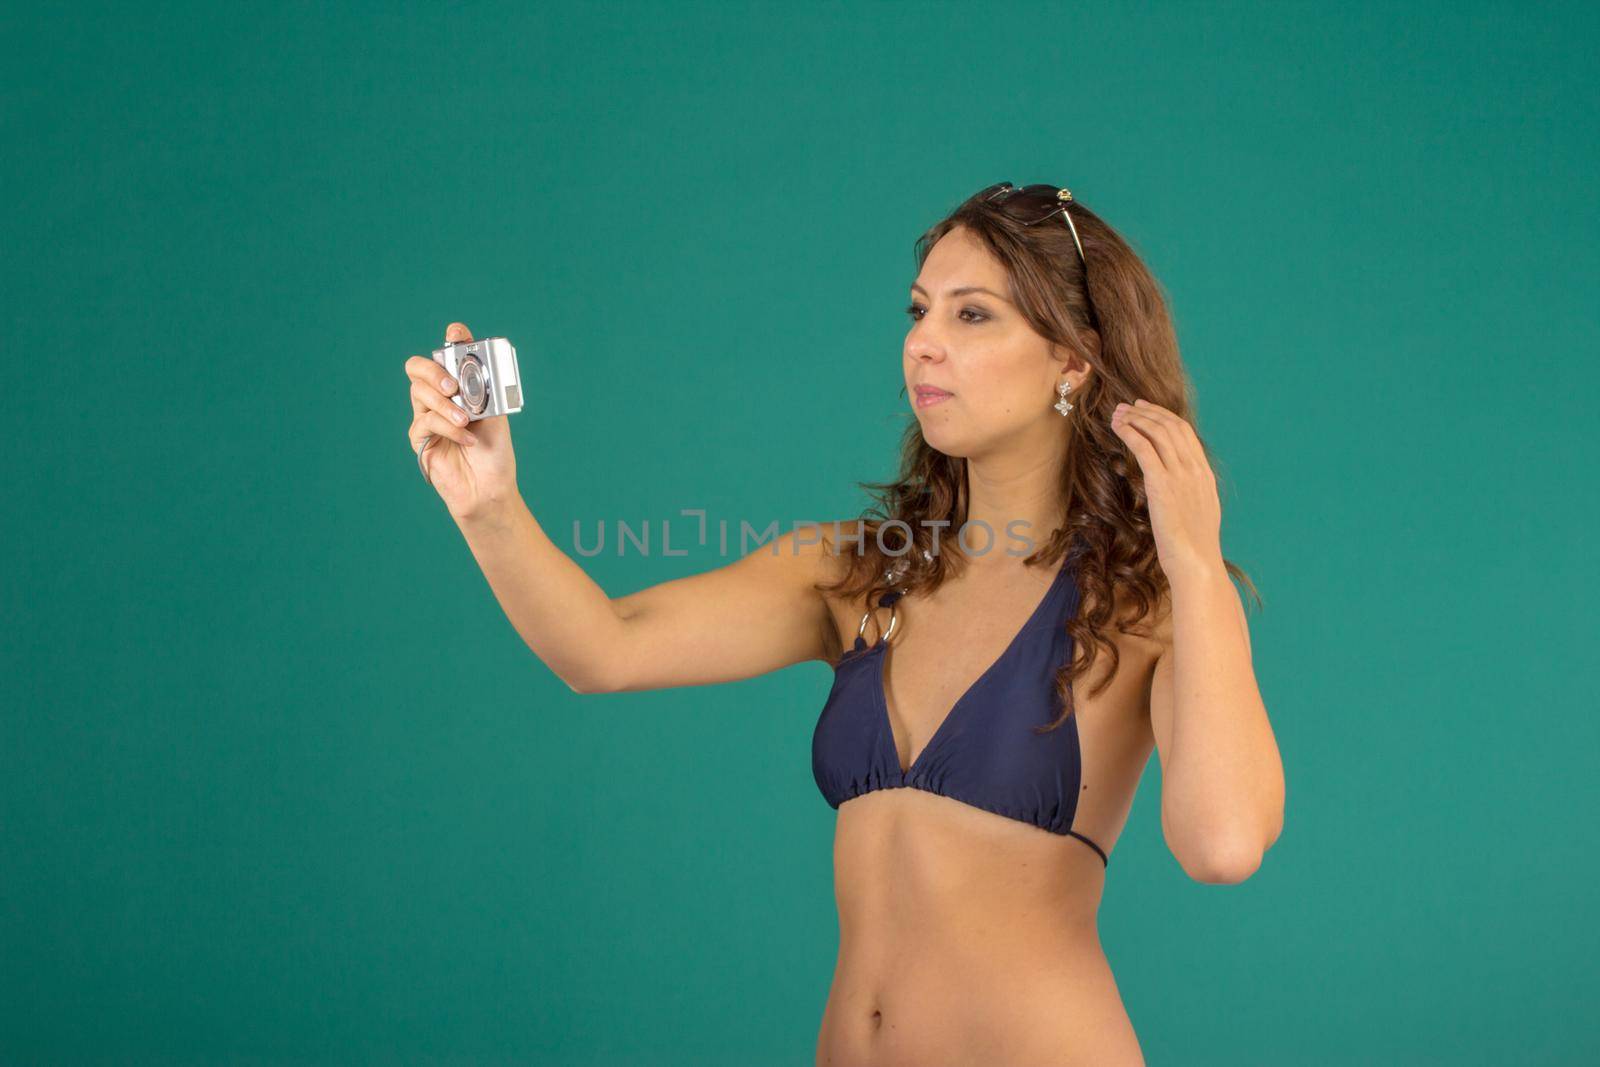 Travel concept. Studio portrait of pretty young woman taking image with camera on green background